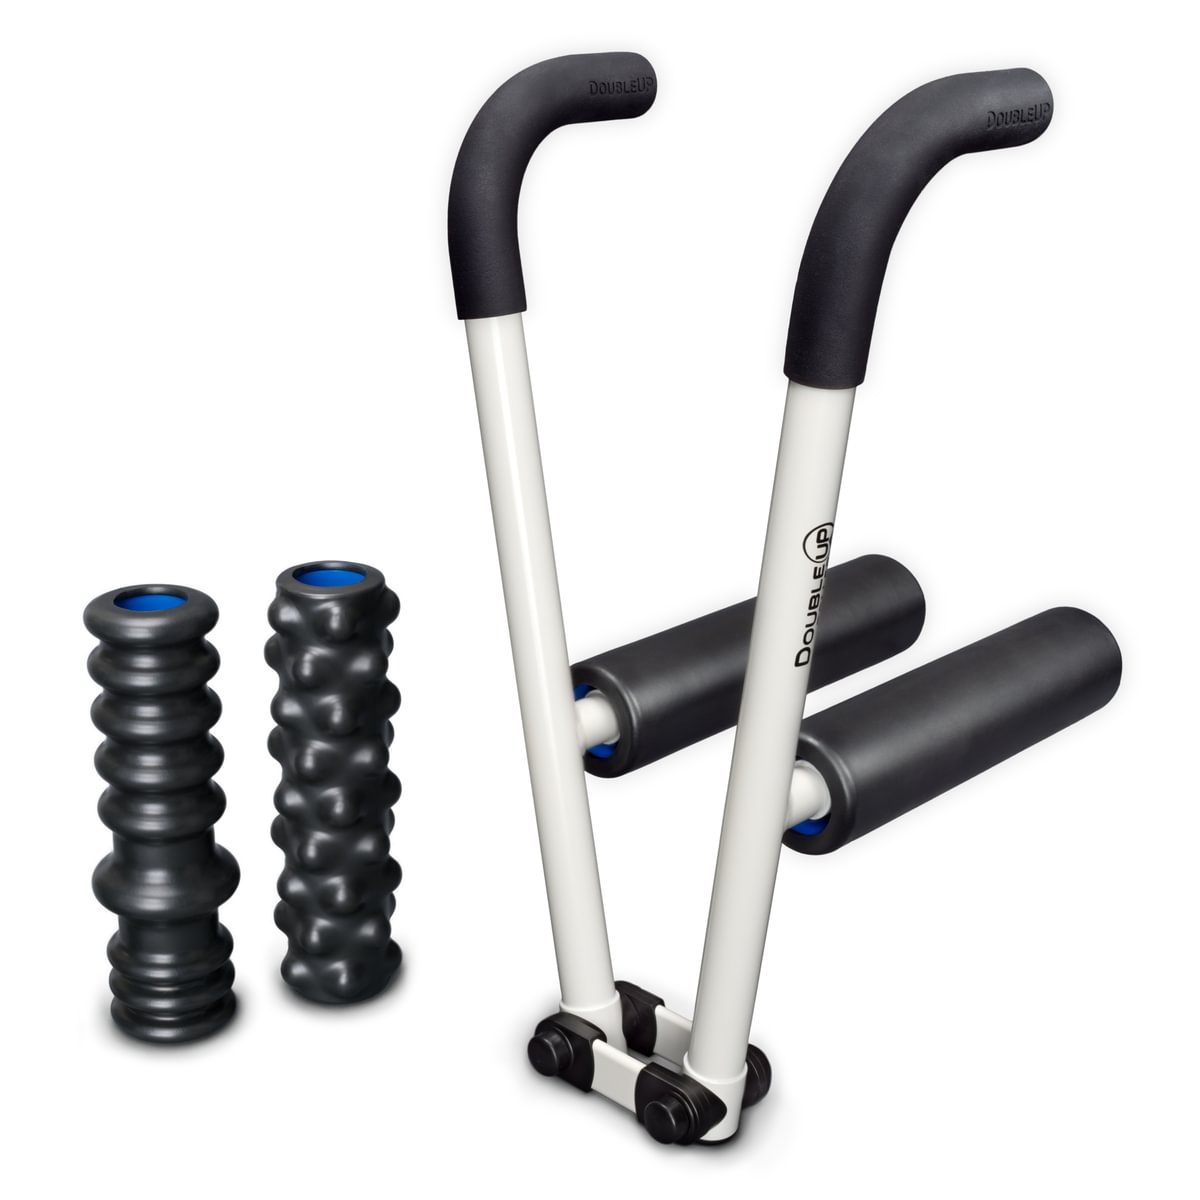 DoubleUp Roller Therapy Kit - White - Muscle Massager with Lever-Action Pressure Control and Quick-Change Rollers